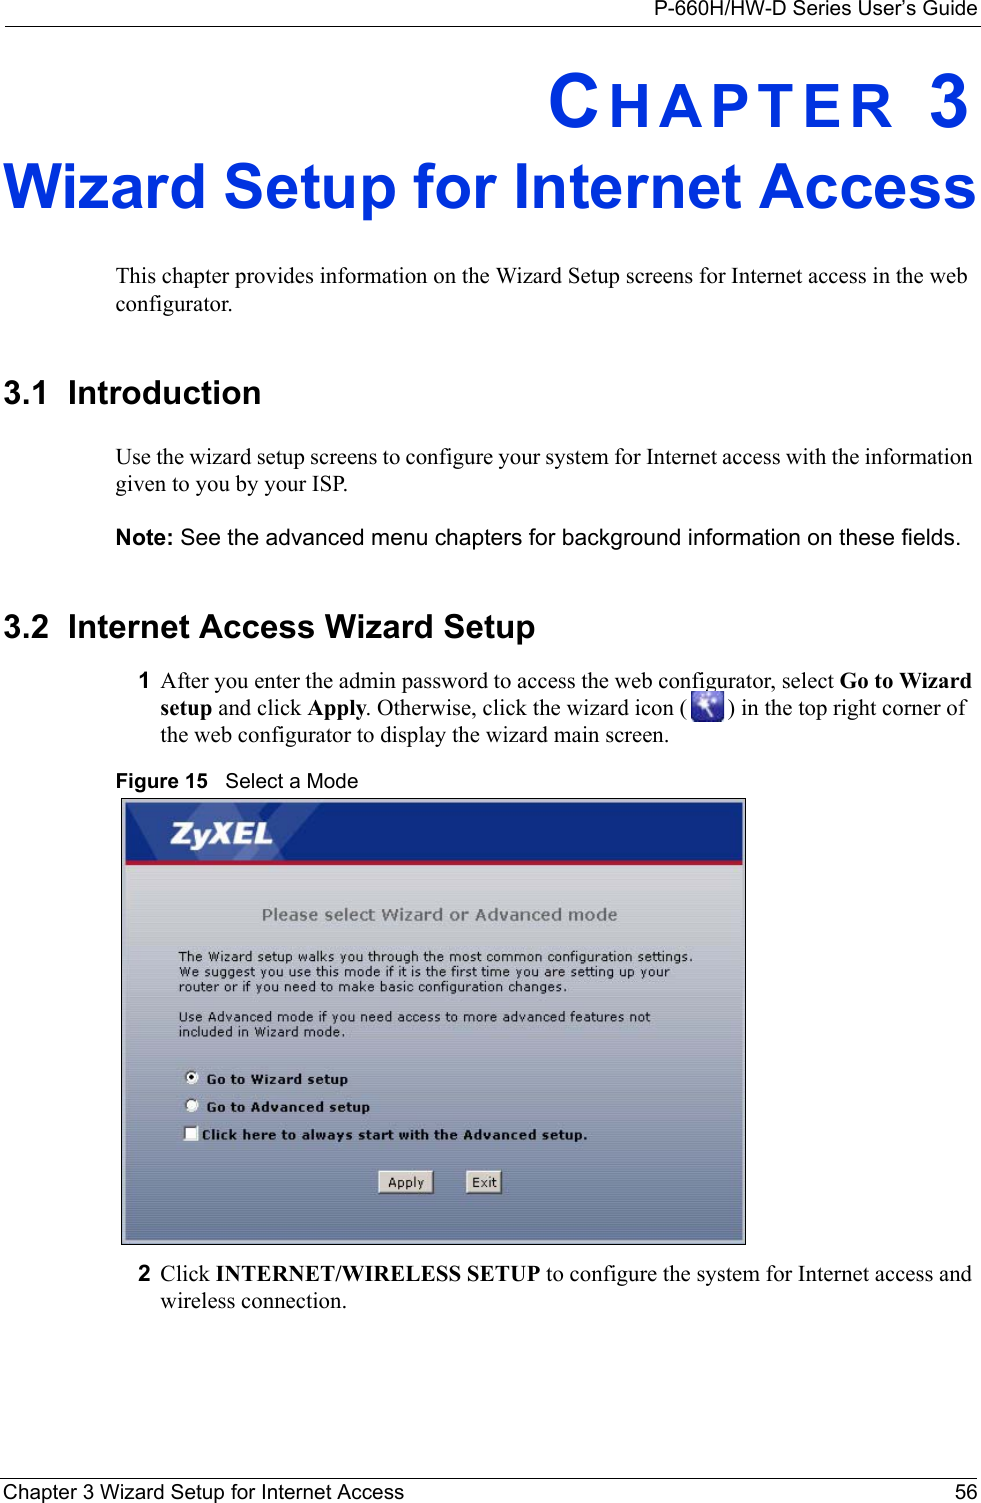 P-660H/HW-D Series User’s GuideChapter 3 Wizard Setup for Internet Access 56CHAPTER 3Wizard Setup for Internet AccessThis chapter provides information on the Wizard Setup screens for Internet access in the web configurator.3.1  IntroductionUse the wizard setup screens to configure your system for Internet access with the information given to you by your ISP. Note: See the advanced menu chapters for background information on these fields.3.2  Internet Access Wizard Setup1After you enter the admin password to access the web configurator, select Go to Wizard setup and click Apply. Otherwise, click the wizard icon ( ) in the top right corner of the web configurator to display the wizard main screen. Figure 15   Select a Mode2Click INTERNET/WIRELESS SETUP to configure the system for Internet access and wireless connection.